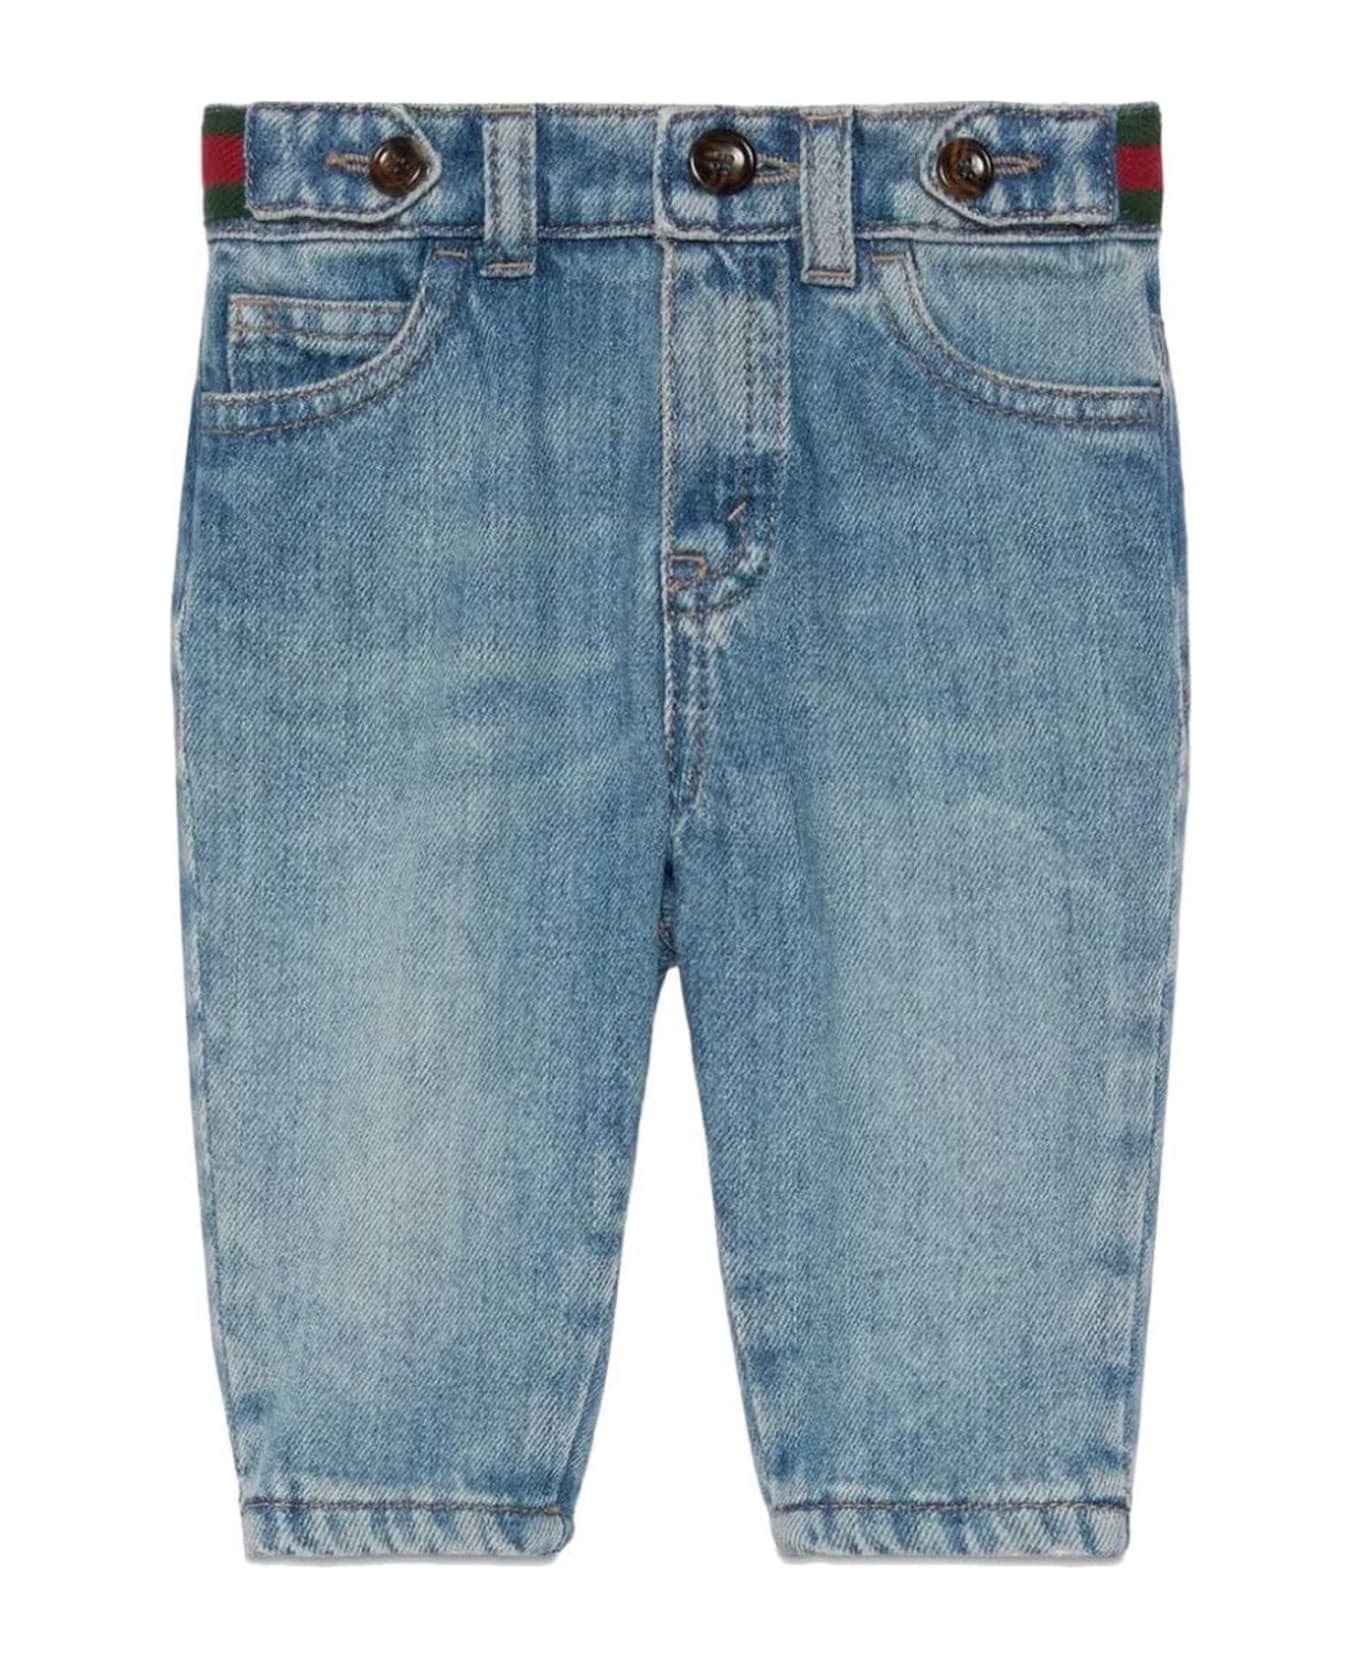 Gucci Kids Jeans Blue - Blue ボトムス